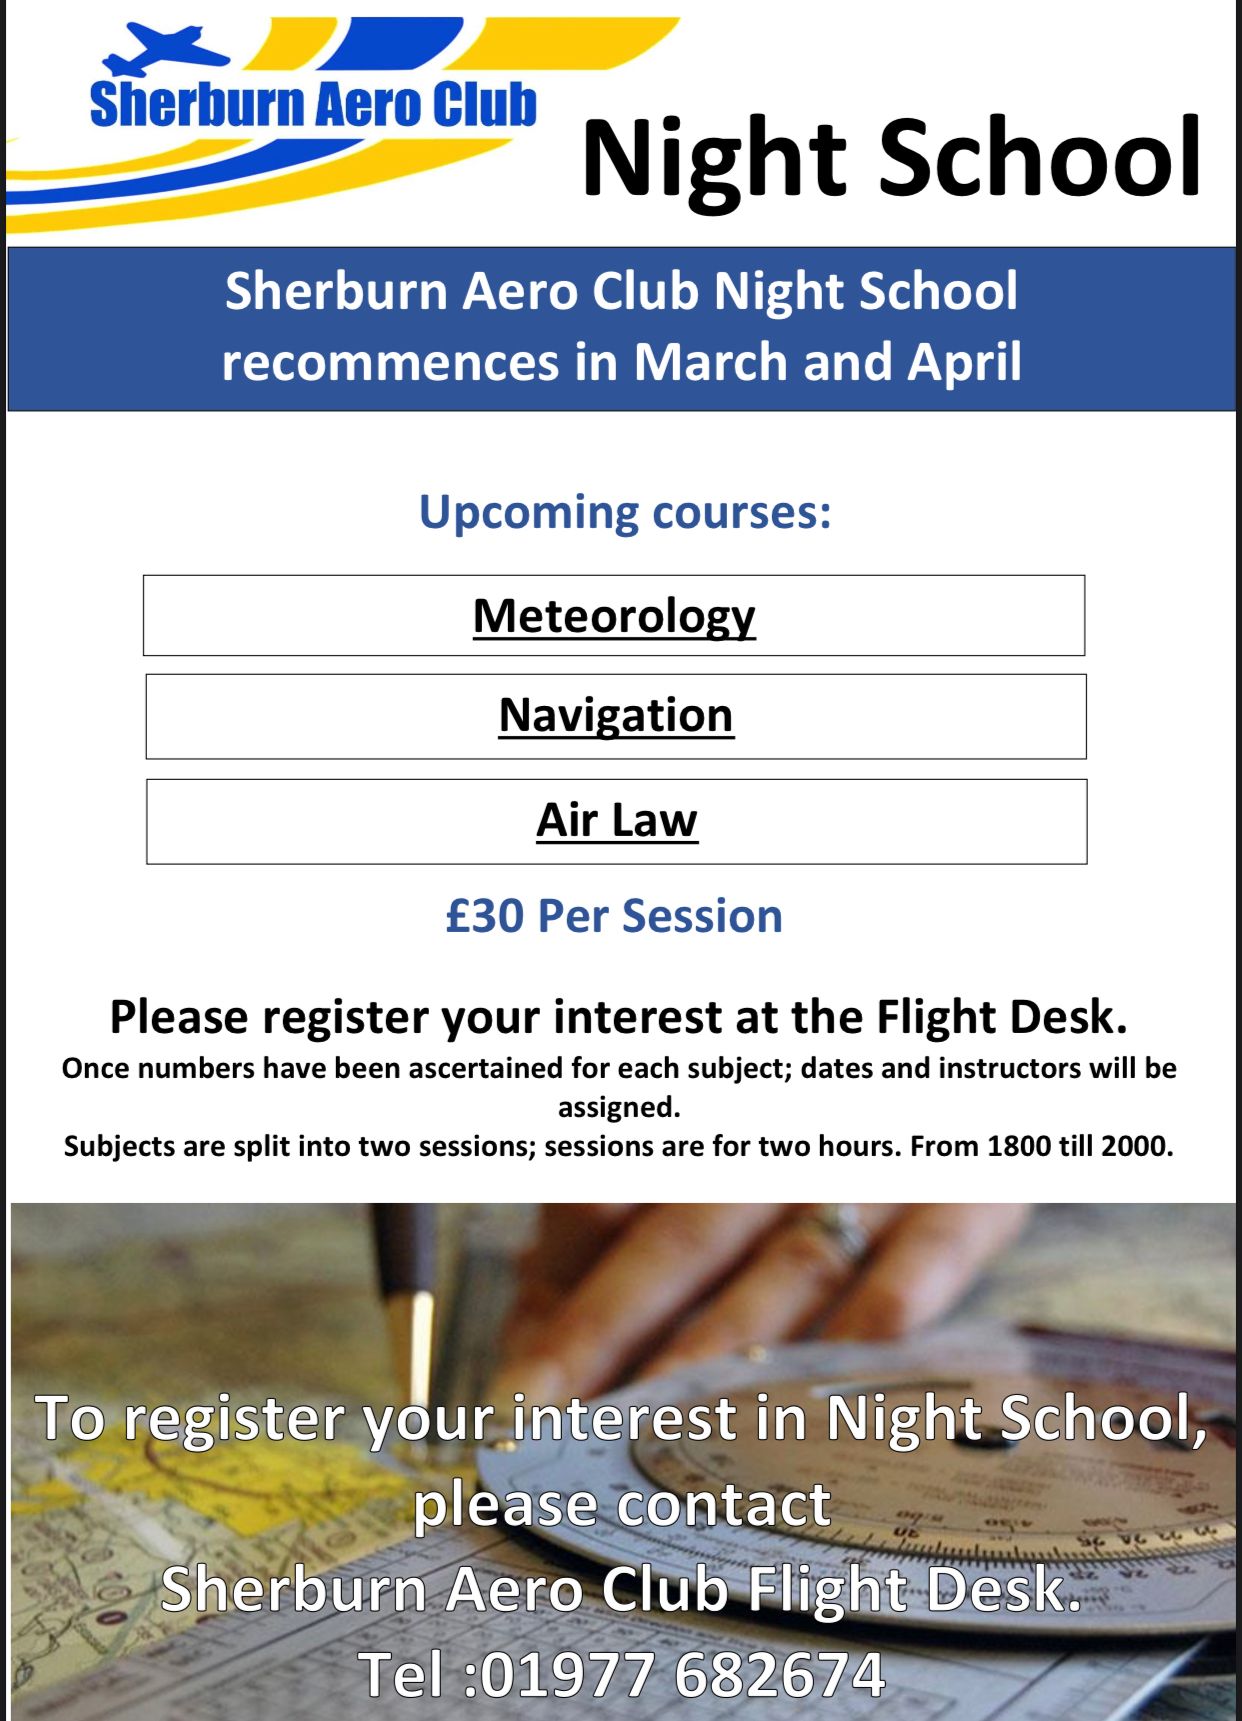 Night School is back at SAC. Speak to one of our instructors for further information.